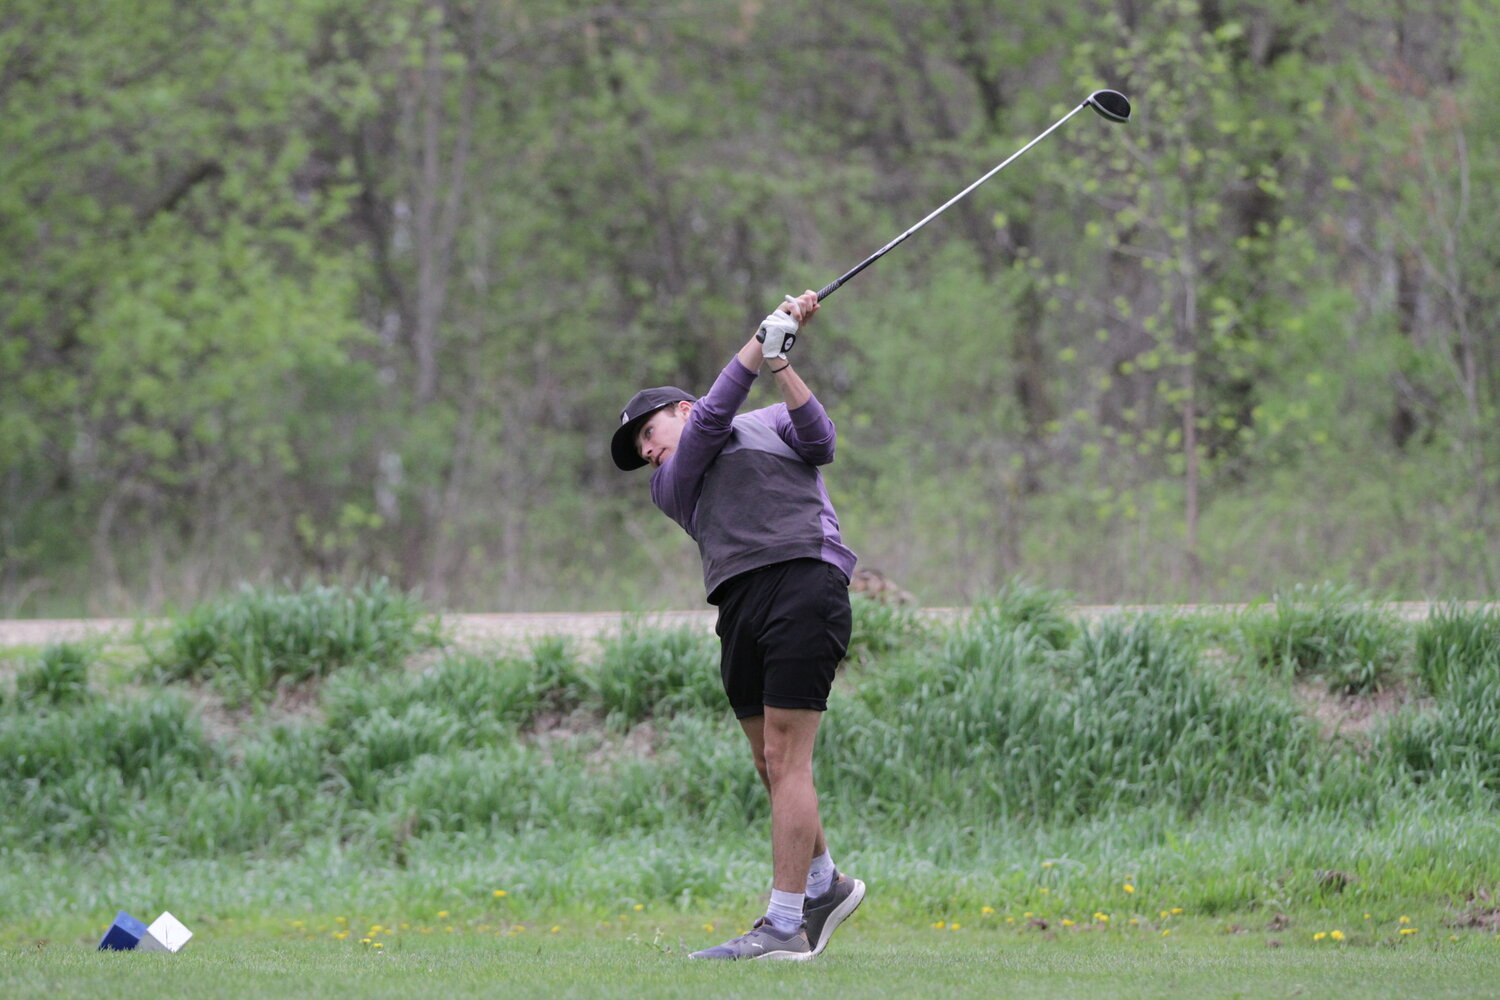 Ellsworth senior Ethan Orcchio blasts a tee shot down the middle of the fairway during a meet earlier this season. Oricchio and the Panthers will compete in the Division 2 sectional meet at Lake Wissota Golf Course in Chippewa Falls on Tuesday, May 30.